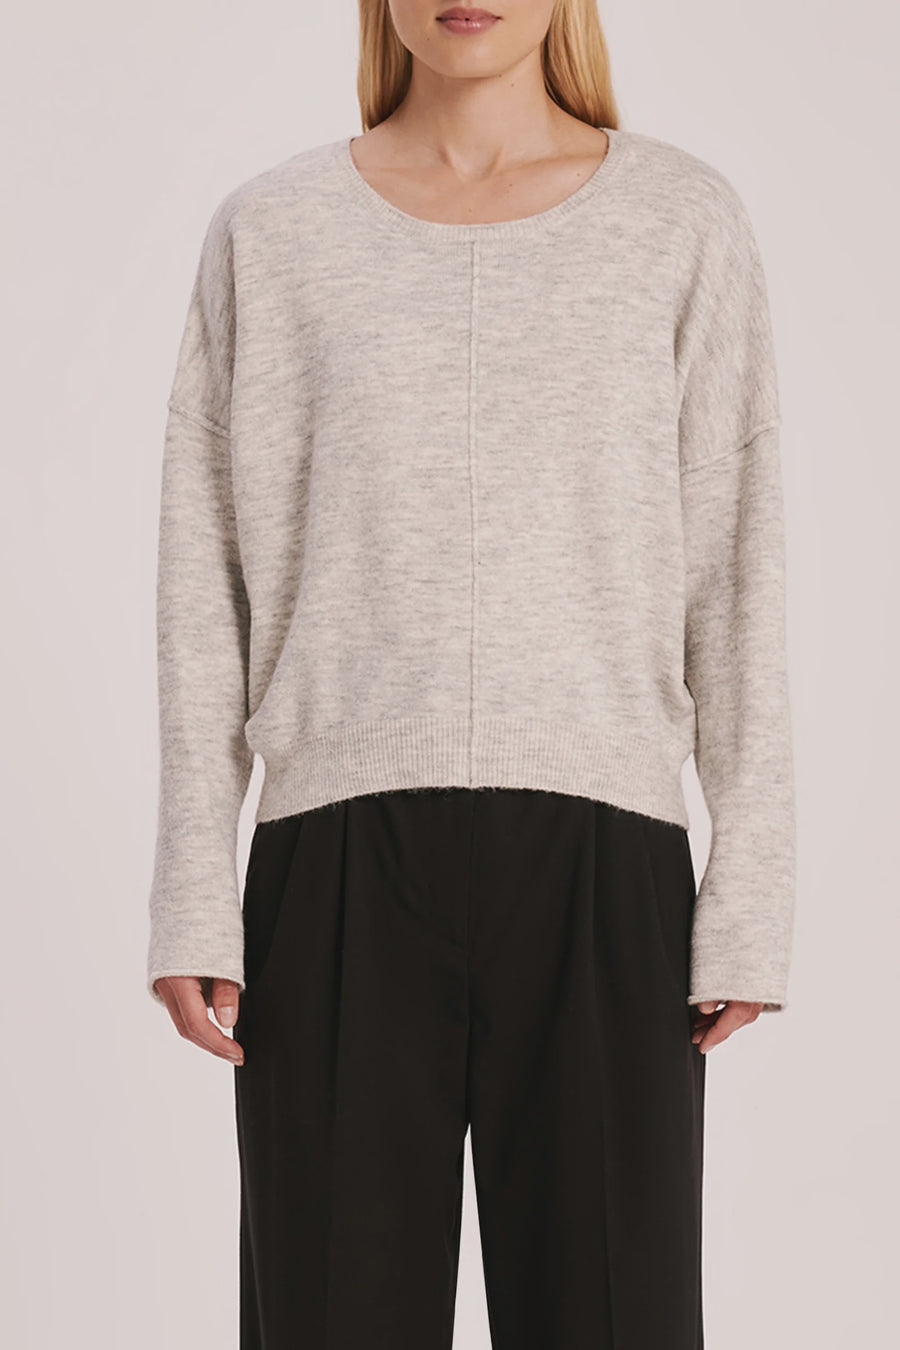 Nude Lucy Remy Knit Grey Marble